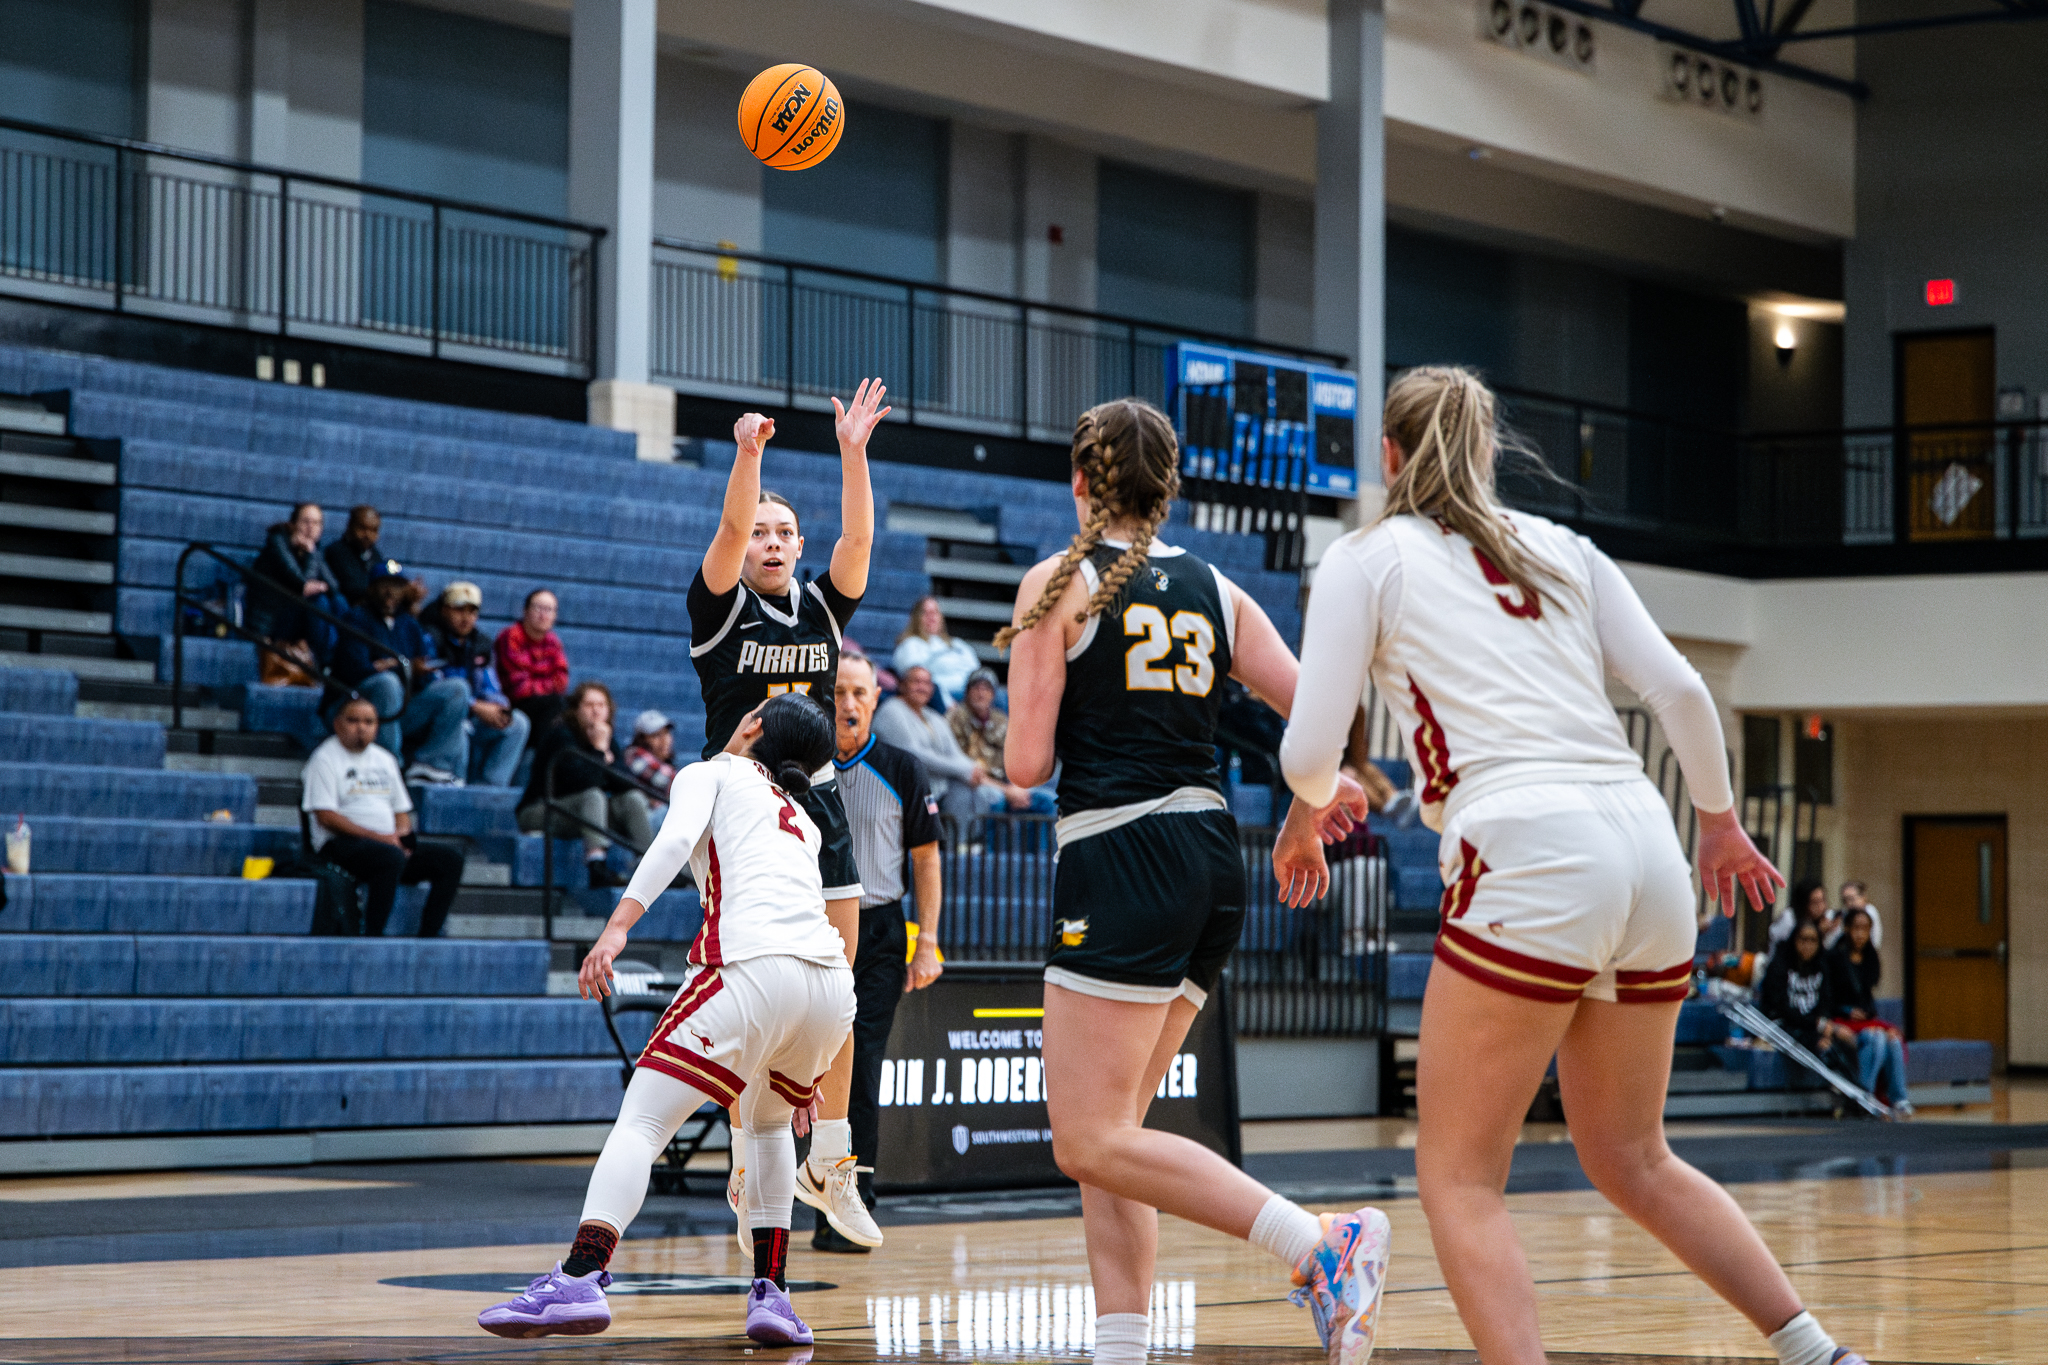 Women's Basketball Drops Game To Trinity, 55-75